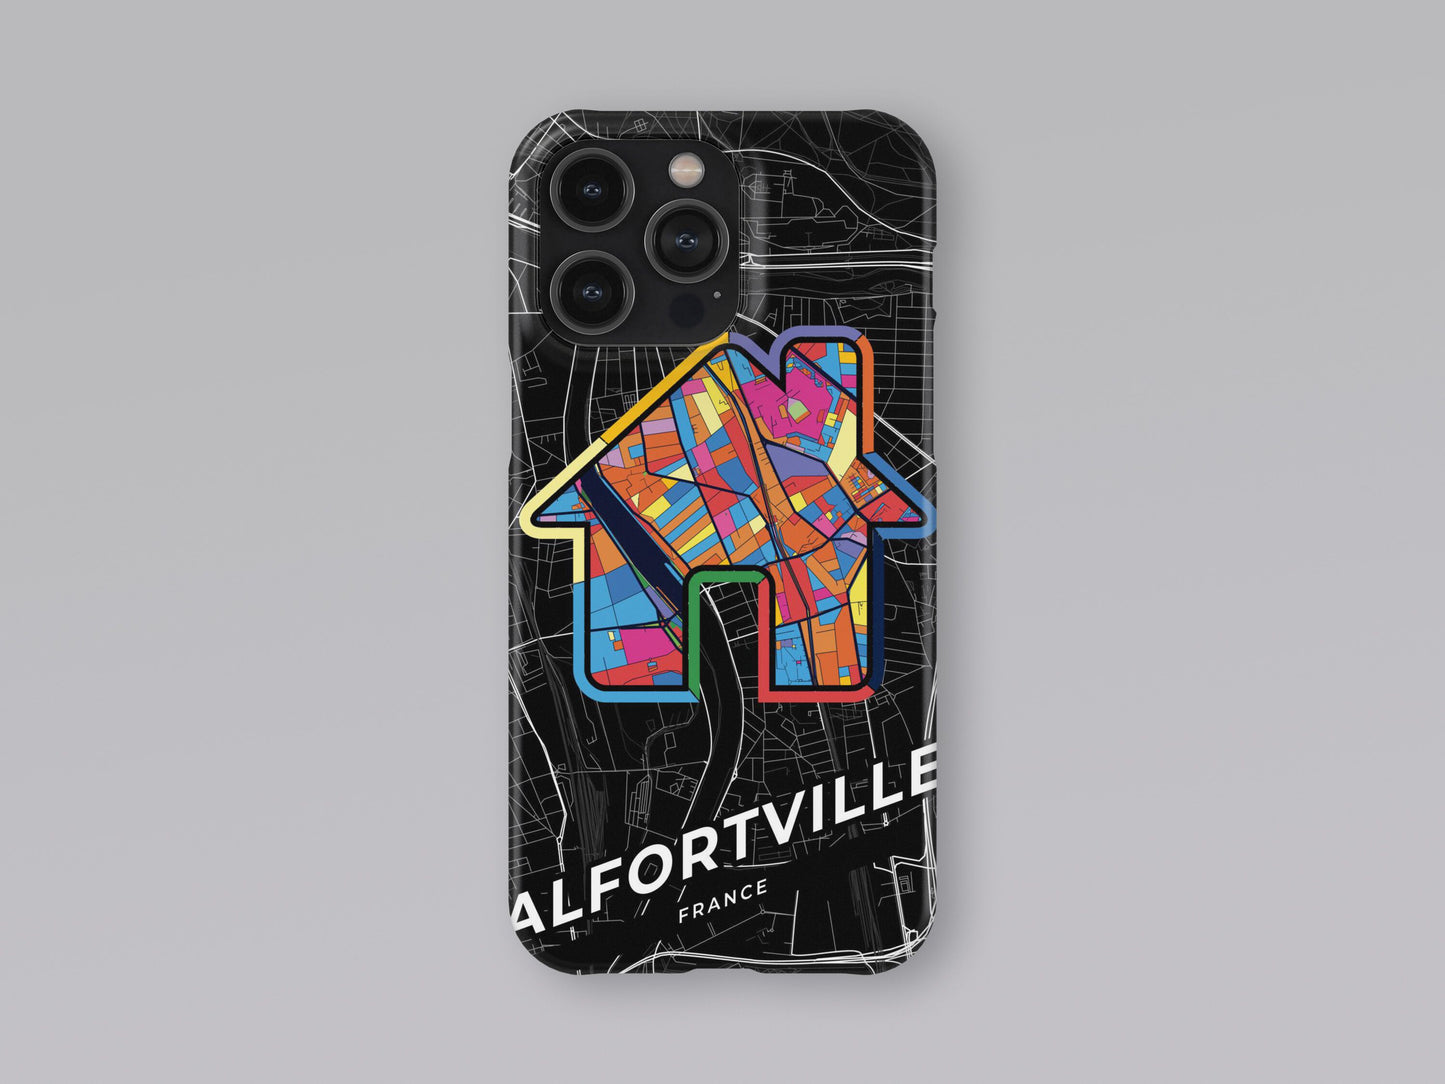 Alfortville France slim phone case with colorful icon. Birthday, wedding or housewarming gift. Couple match cases. 3